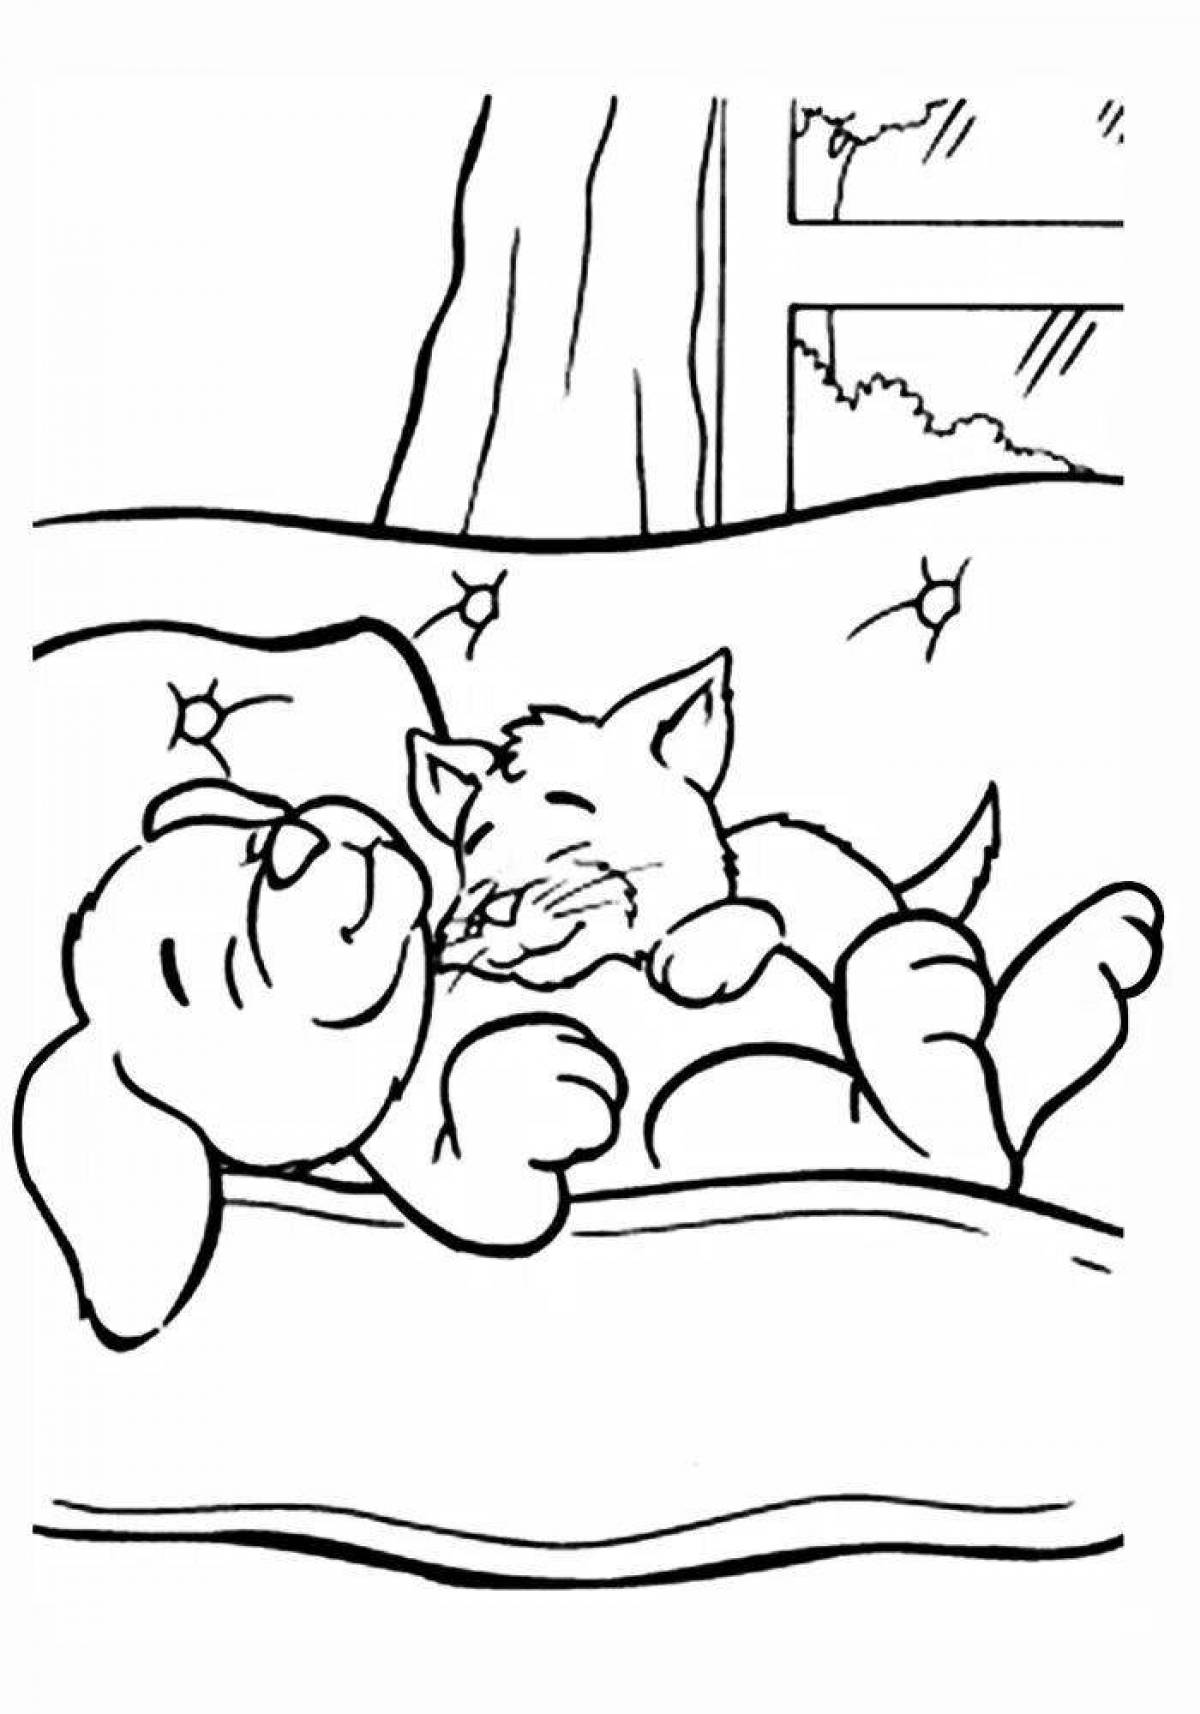 Blissful dog and cat coloring page